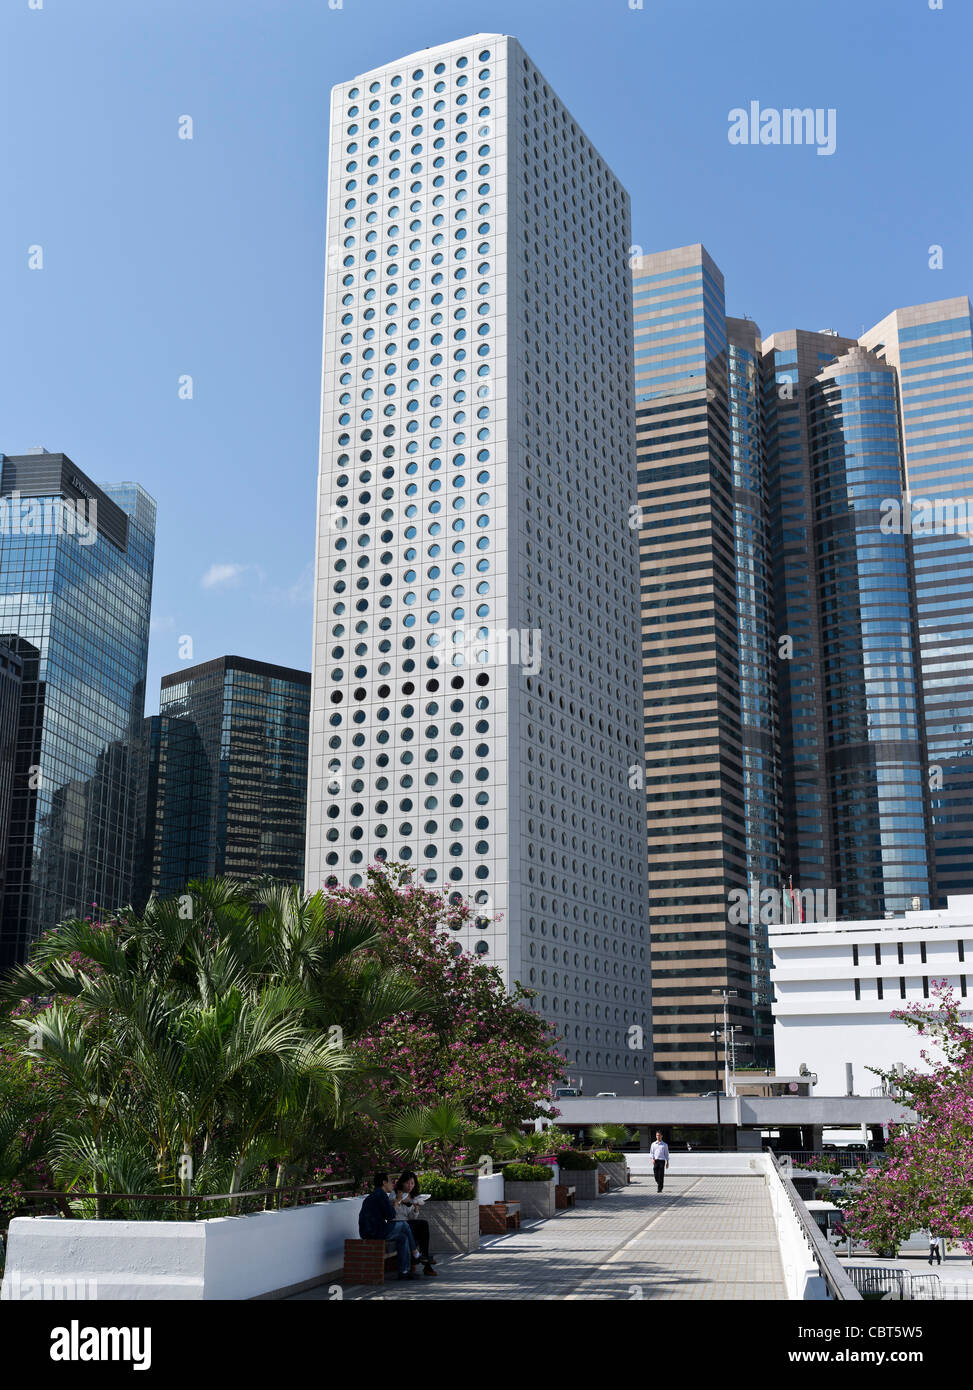 dh  CENTRAL HONG KONG People relaxing City Hall Memorial garden Jardine House Exchange Square business tall buildings towers daytime tower Stock Photo